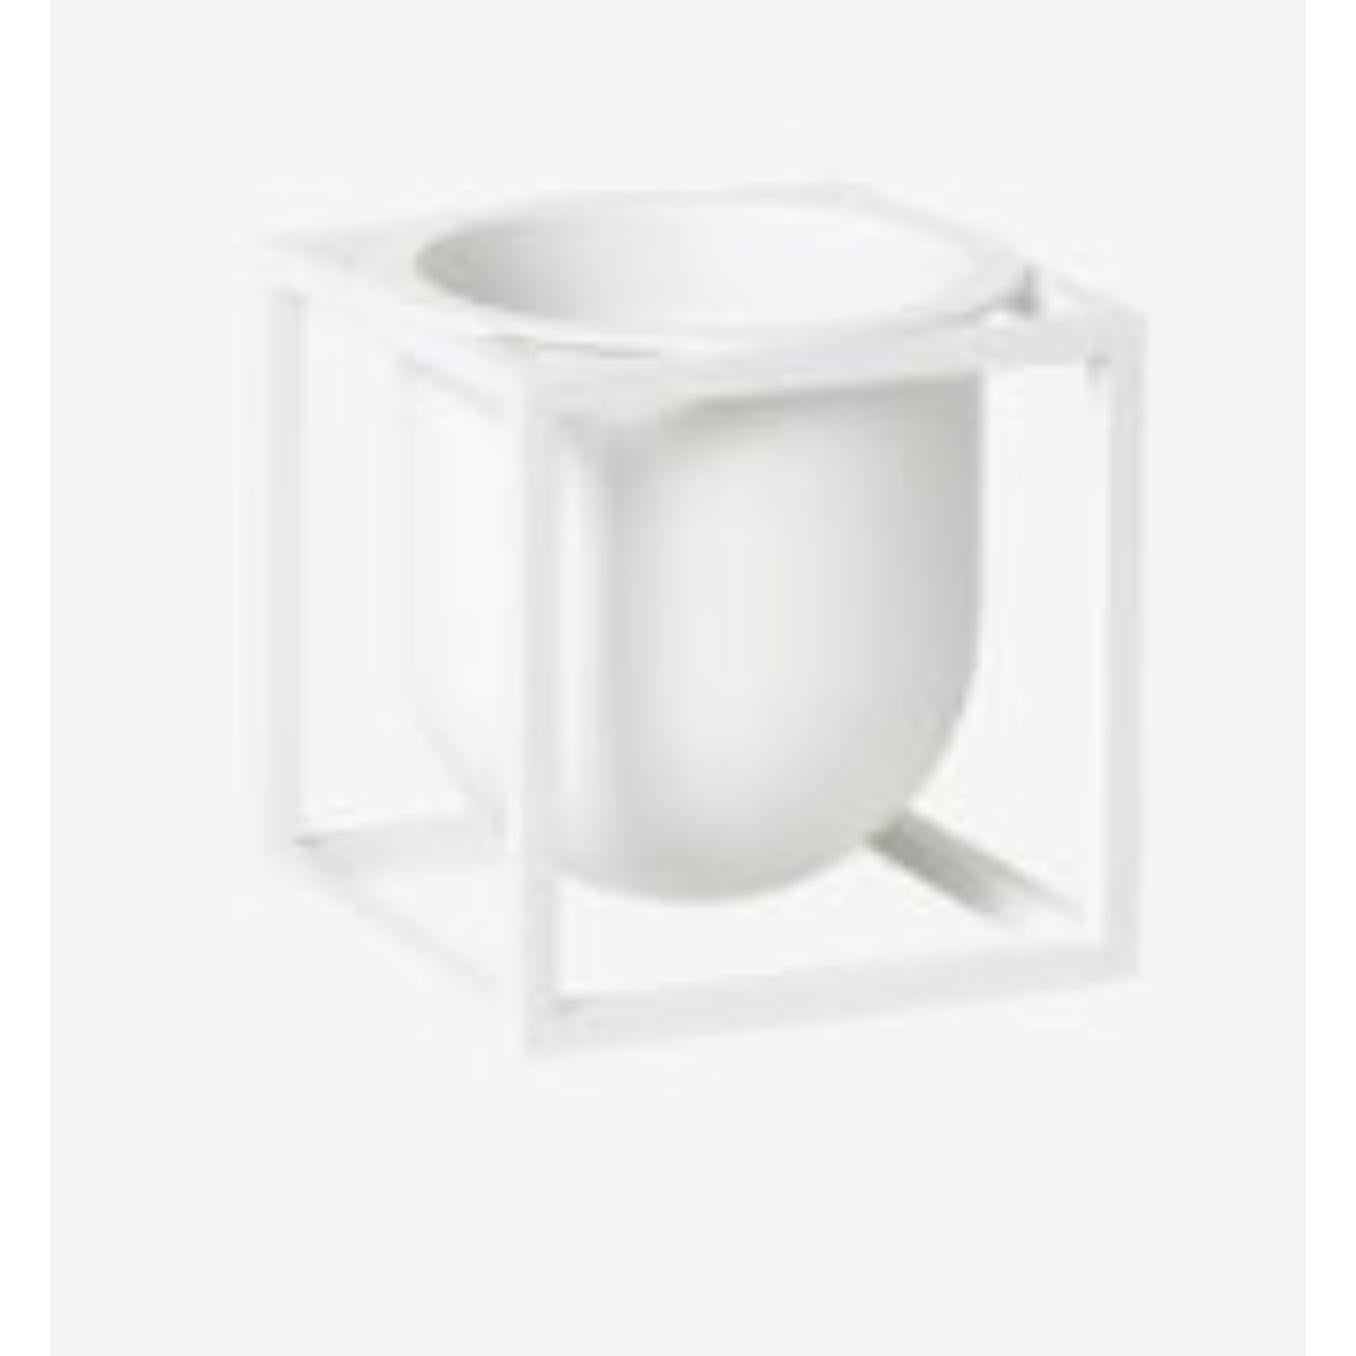 White flowerpot 14 Kubus Vvse by Lassen
Dimensions: D 14 x W 14 x H 14 cm 
Materials: Metal 
Also available in different colors and dimensions. 
Weight: 1.39 Kg

Herb pot, vase or a simple container. The possibilities are endless. Another